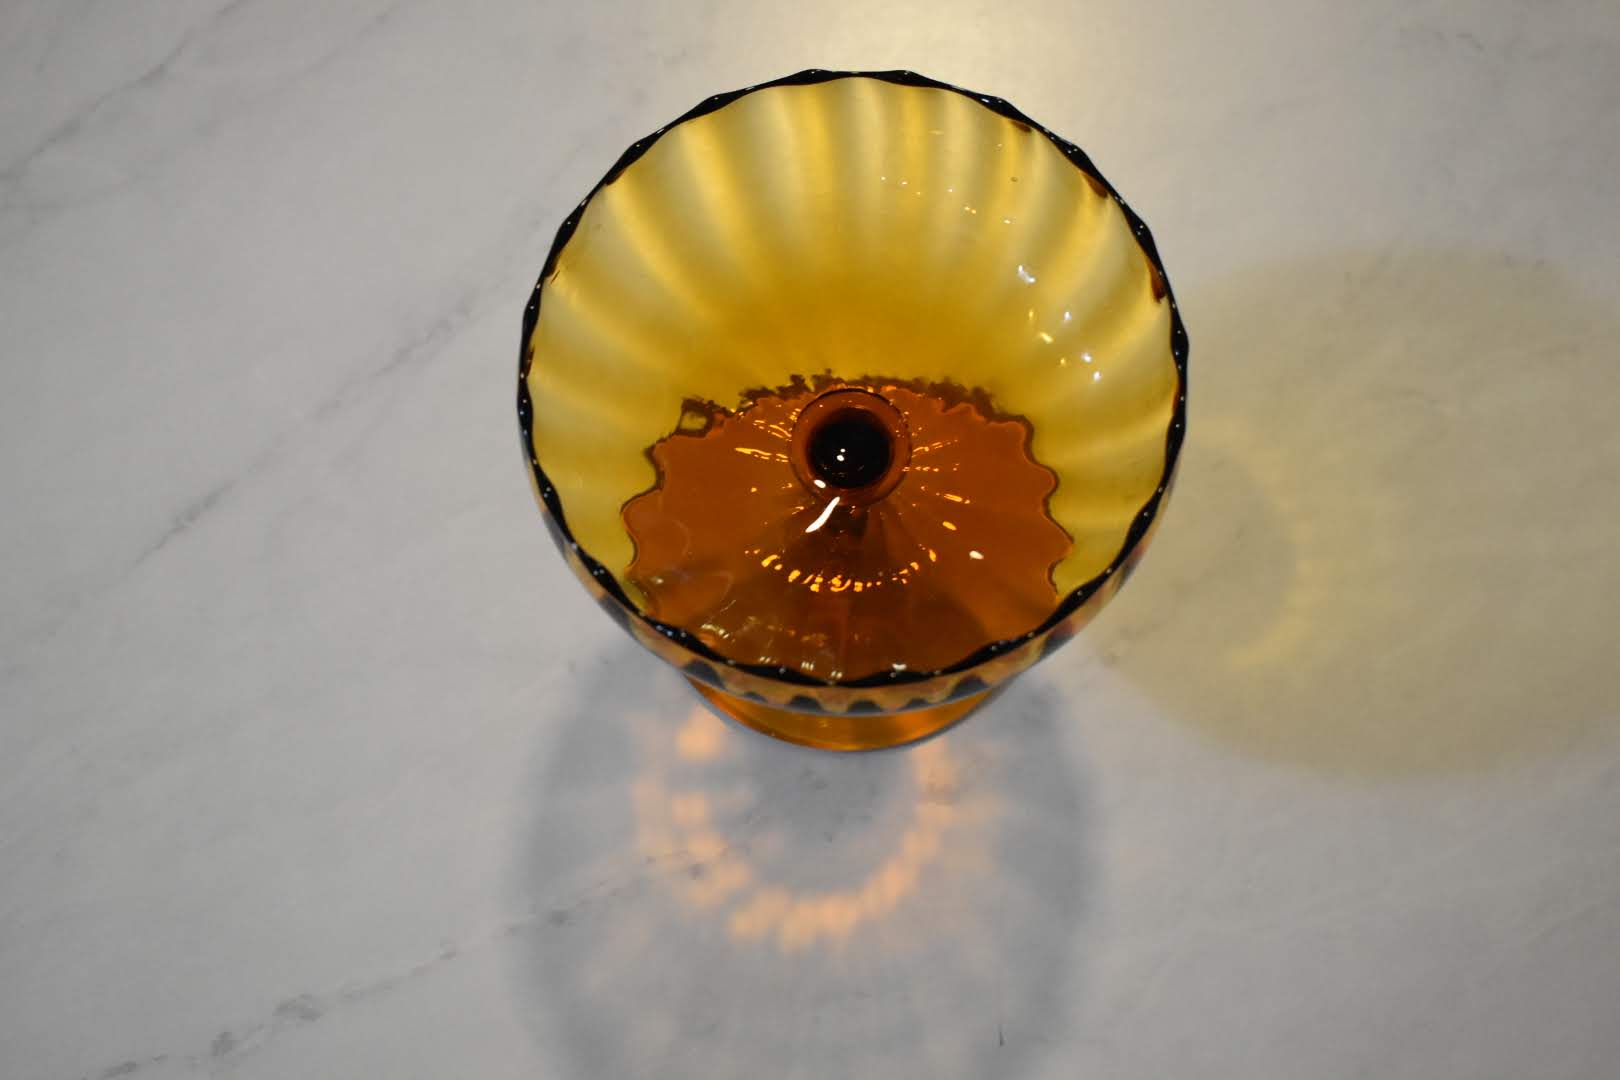 Amber Crystal Glass - Golden Yellow Color Candy Bowl - Table Home Decor